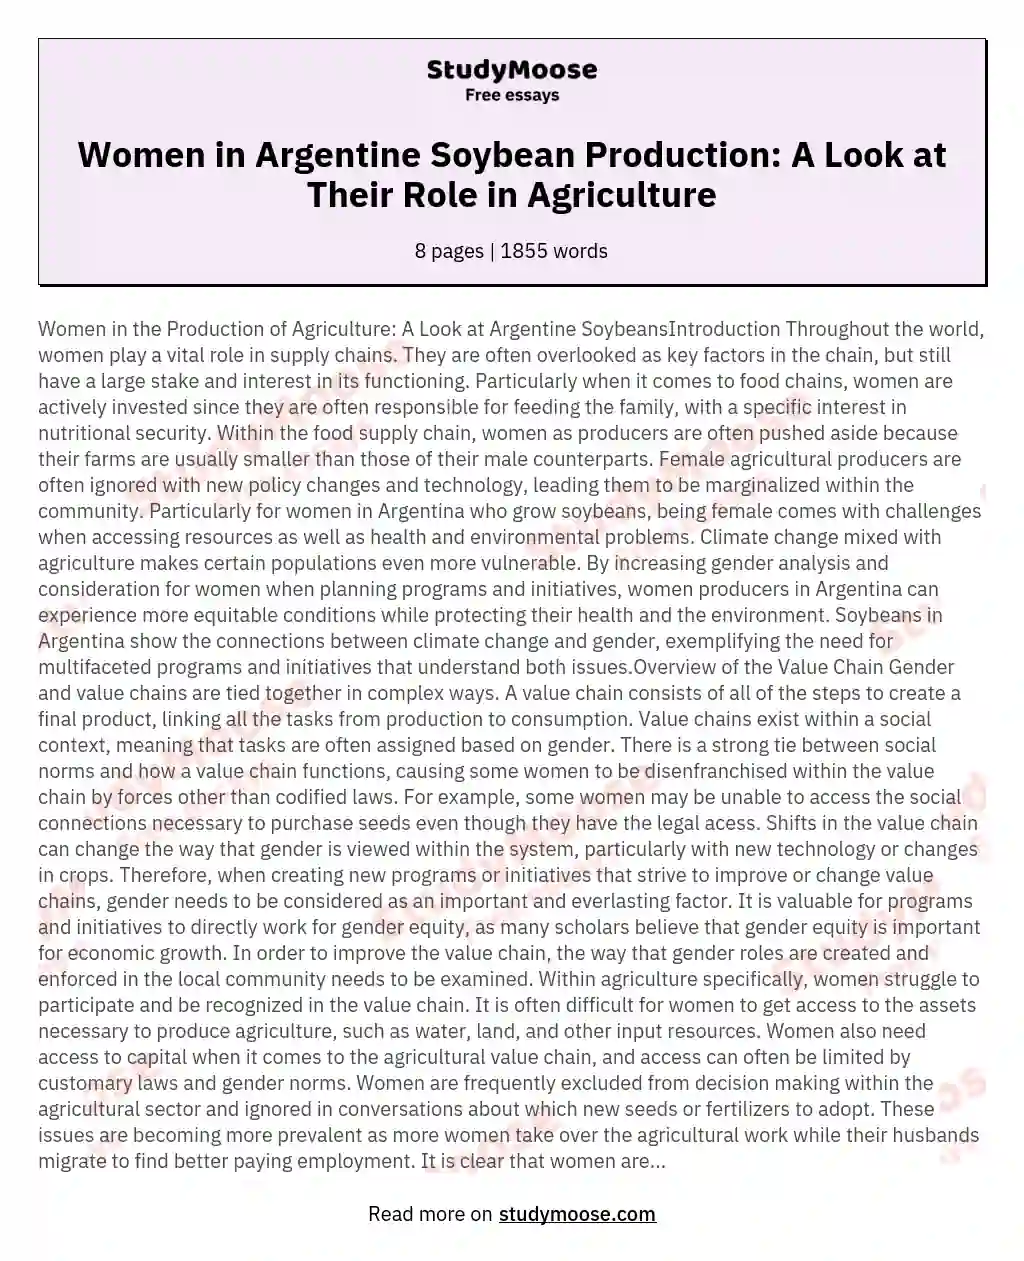 Women in Argentine Soybean Production: A Look at Their Role in Agriculture essay